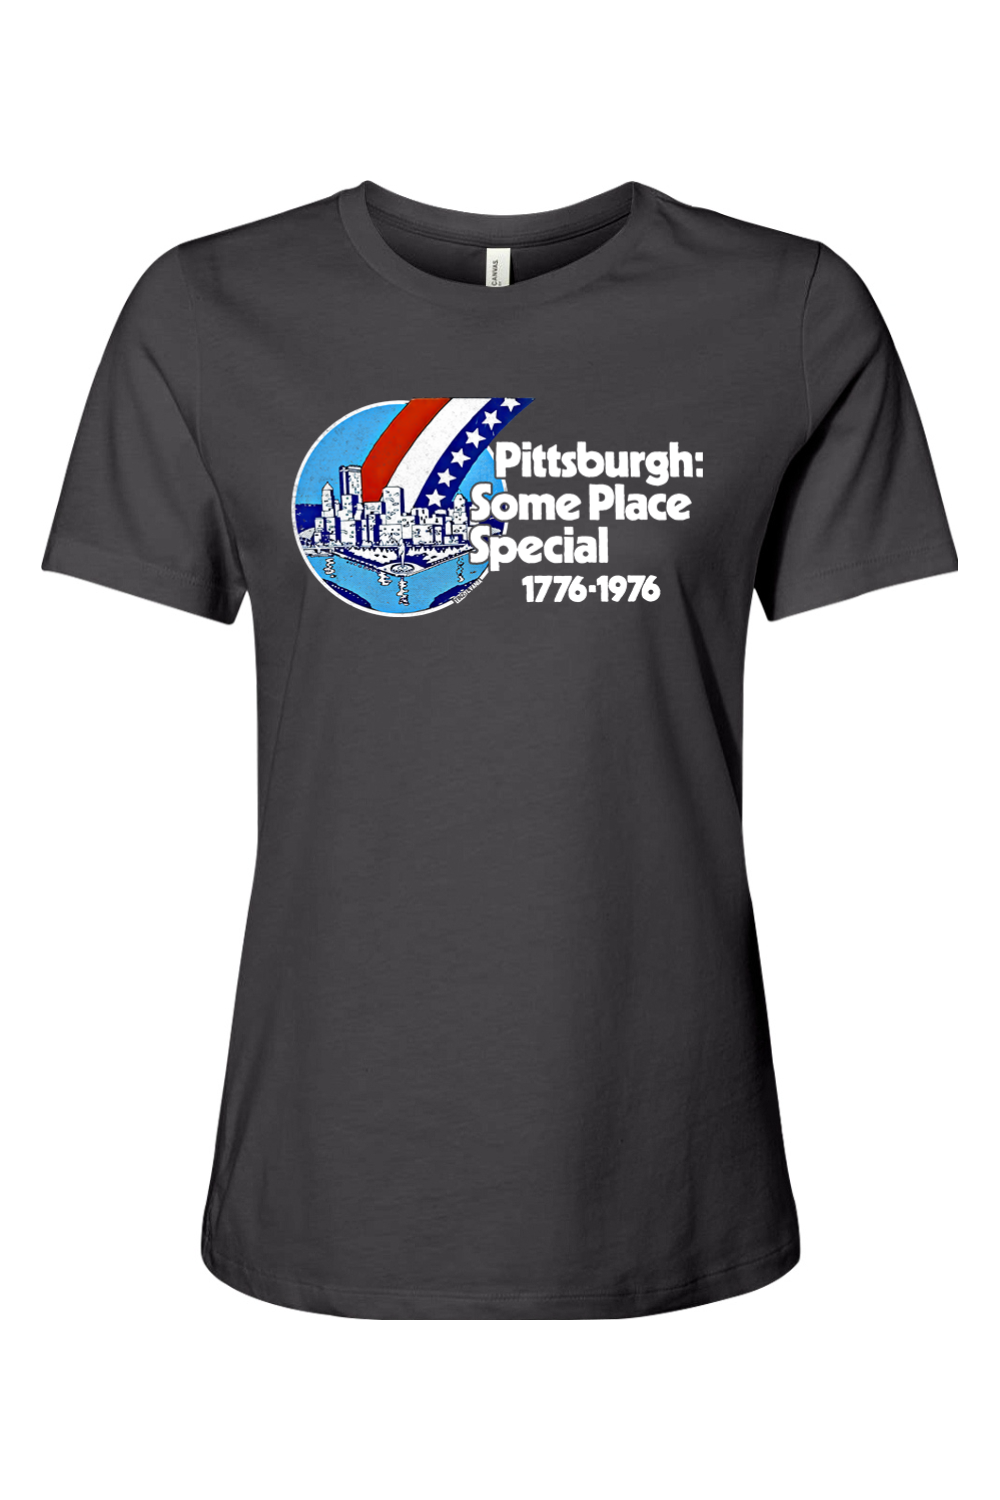 Pittsburgh - Some Place Special - Ladies Tee - Yinzylvania